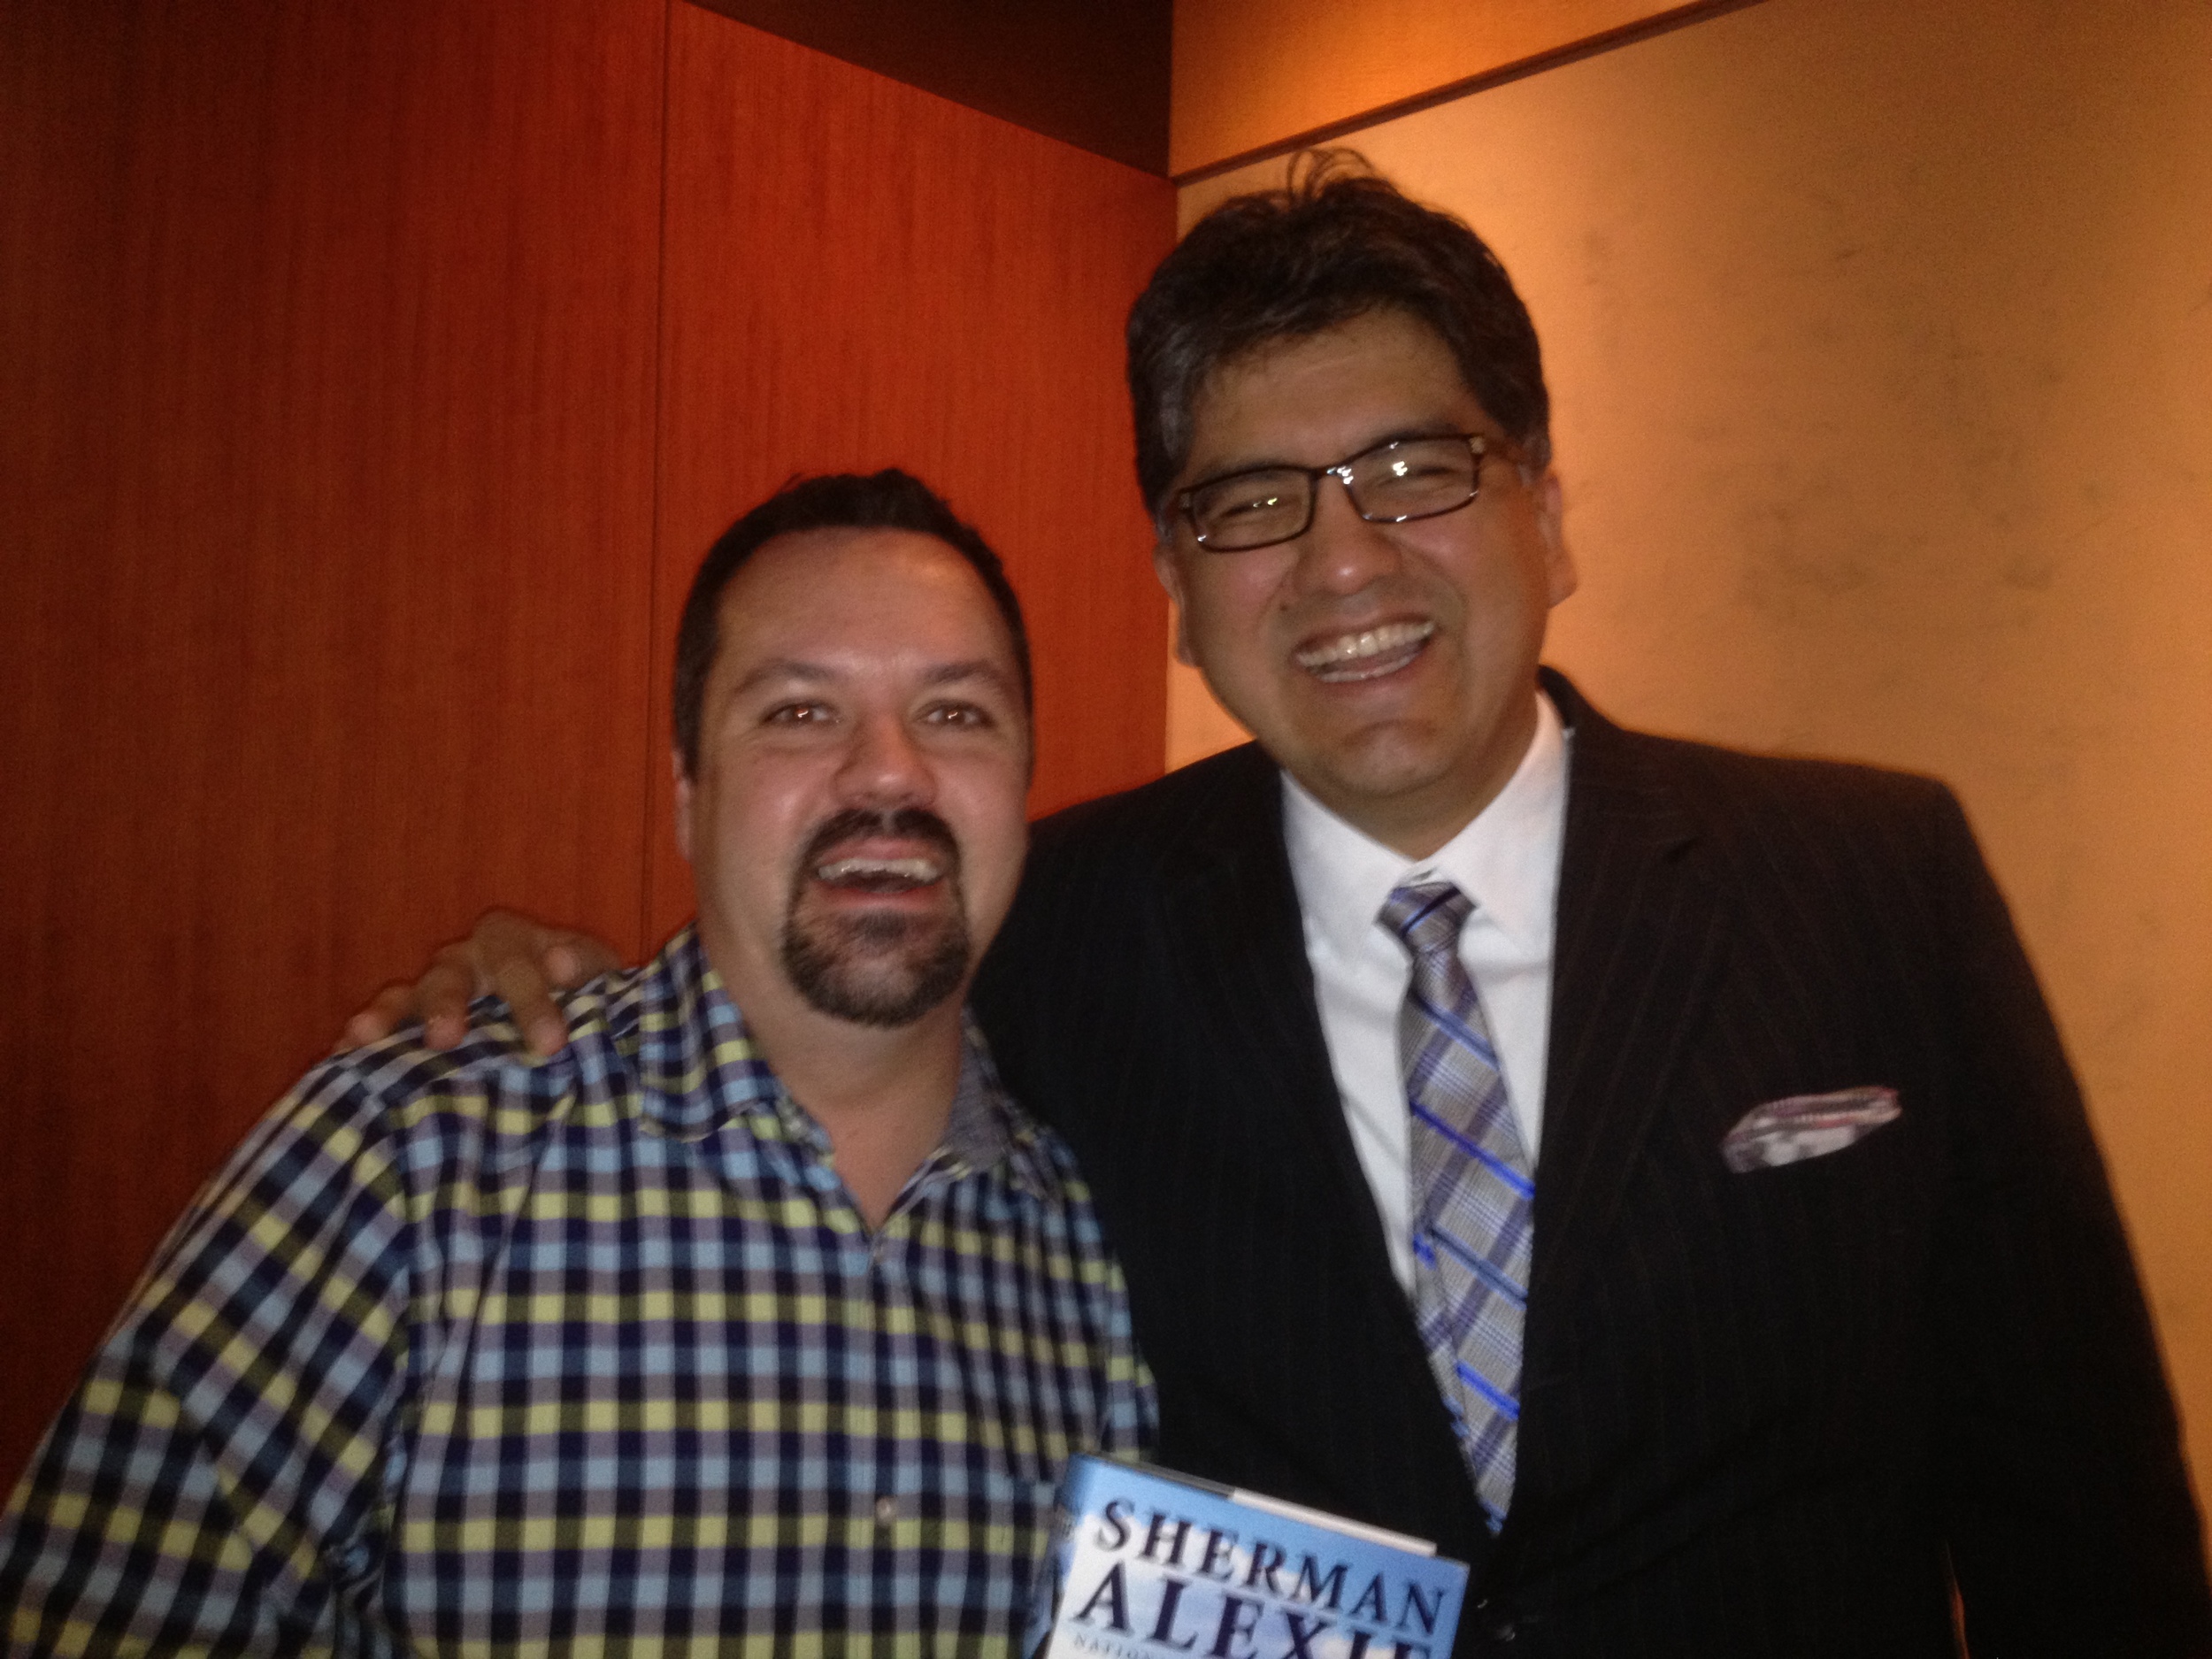  Kevin with National Book Award winner Sherman Alexie in Seattle. Alexie confessed that true crime is among his favorite genres to read when he's not writing (no word on if he's picked up a Flynn/Lavoie tome). 